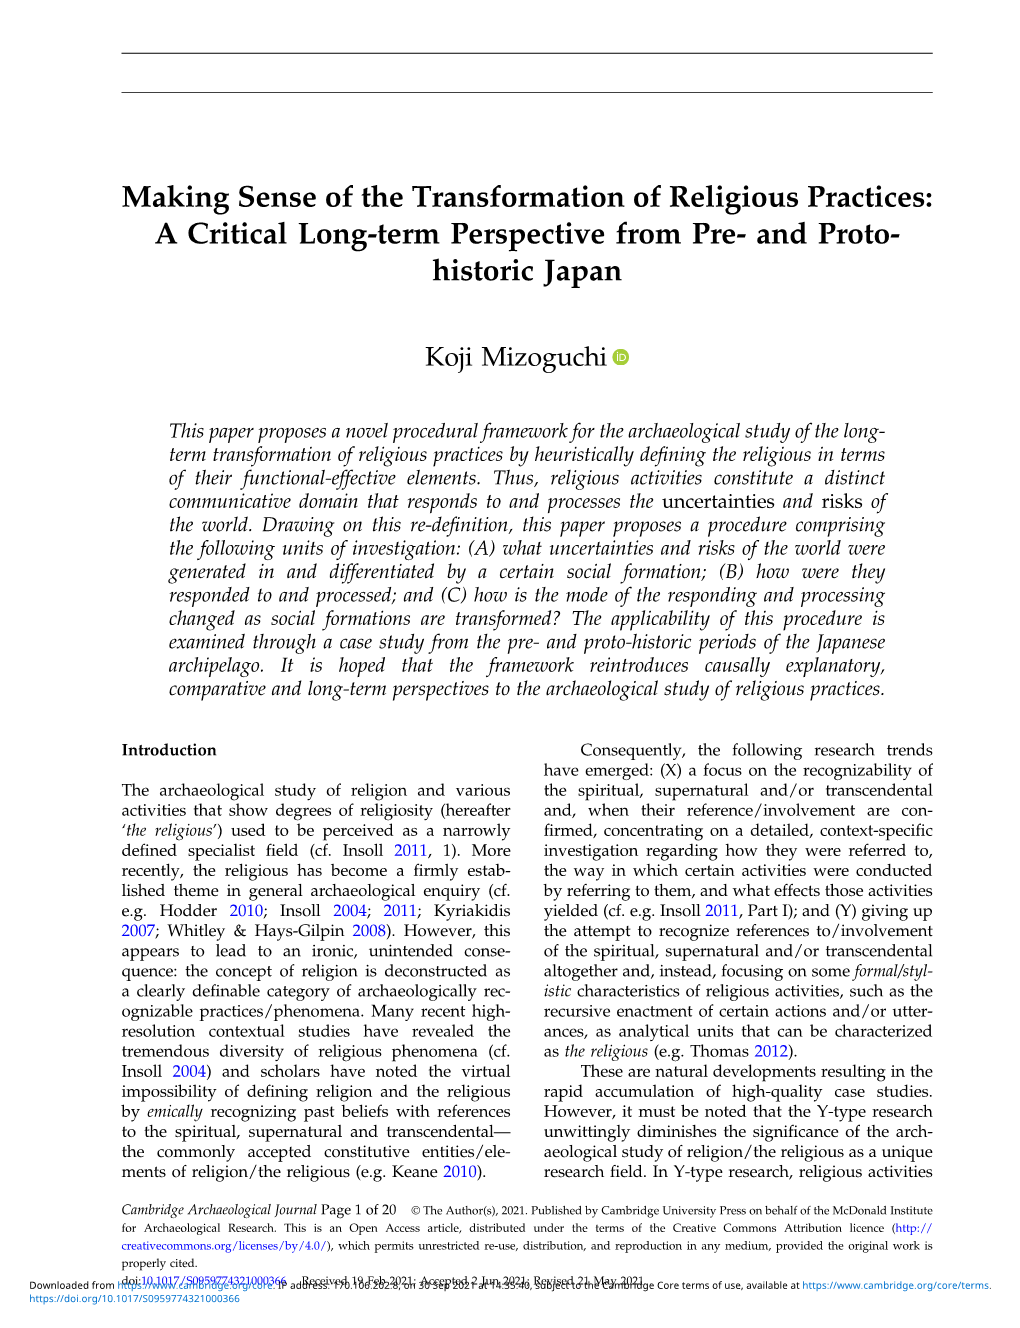 Making Sense of the Transformation of Religious Practices: a Critical Long-Term Perspective from Pre- and Proto- Historic Japan